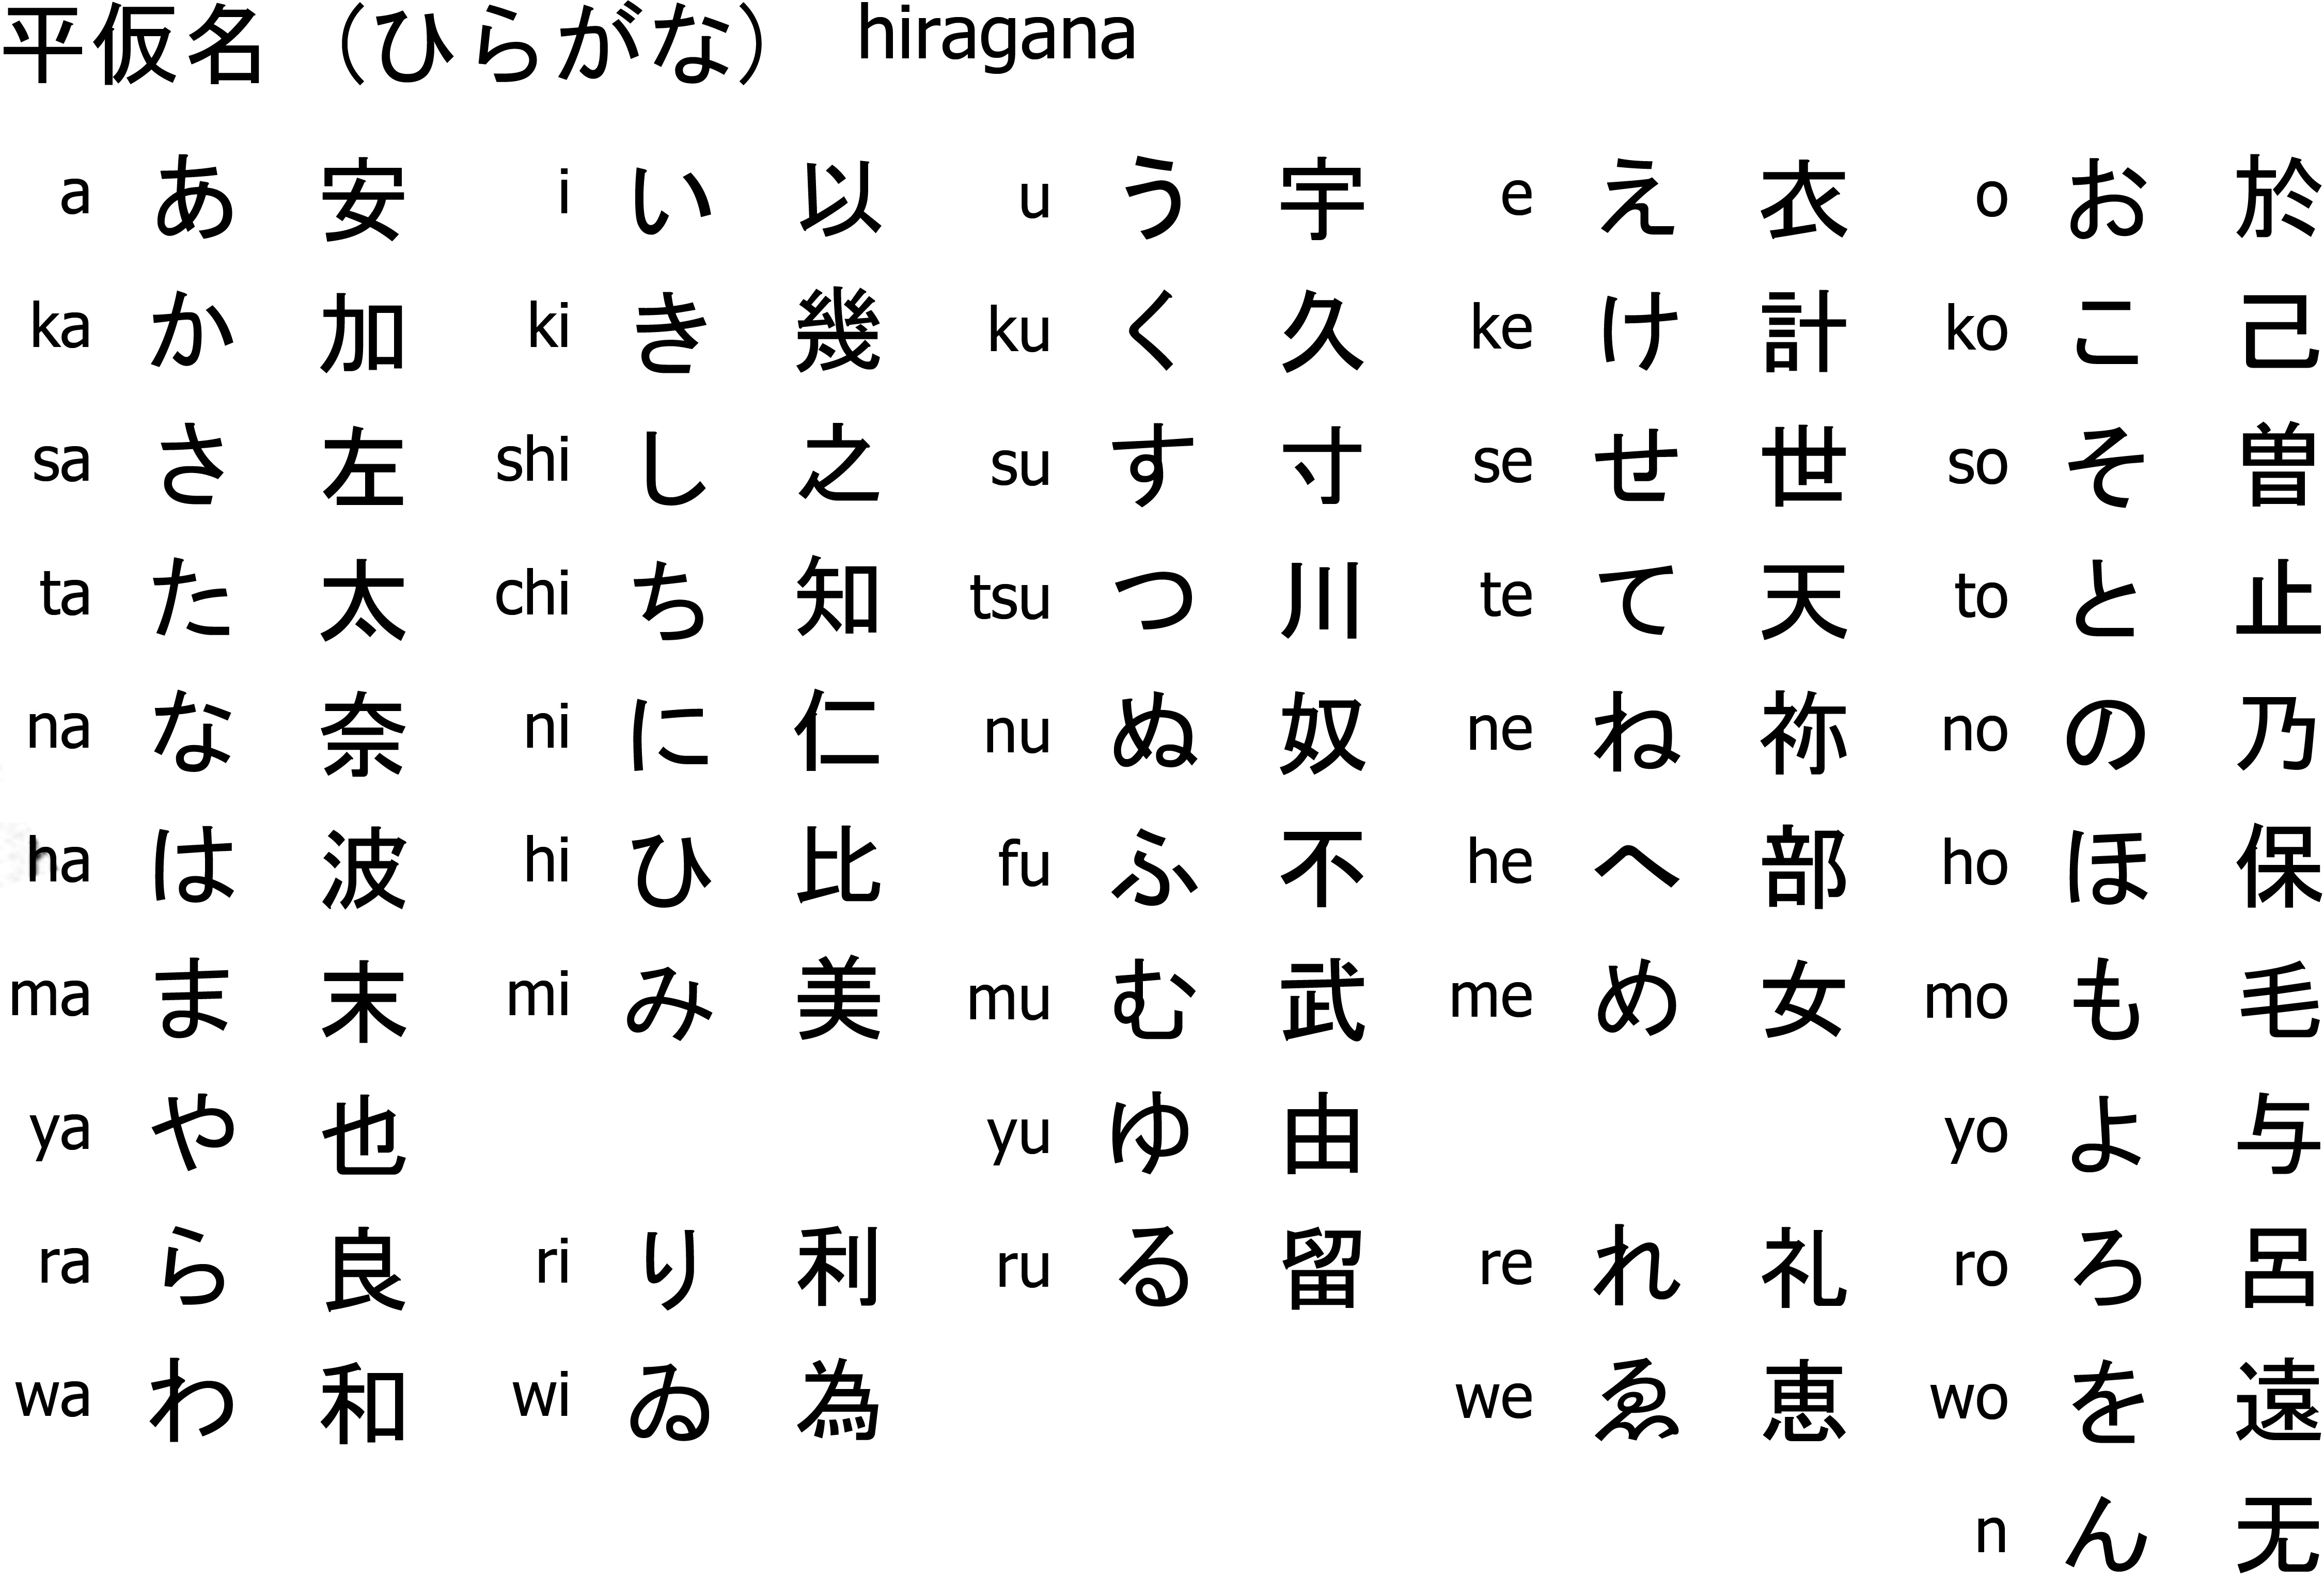 english to japanese character dictionary